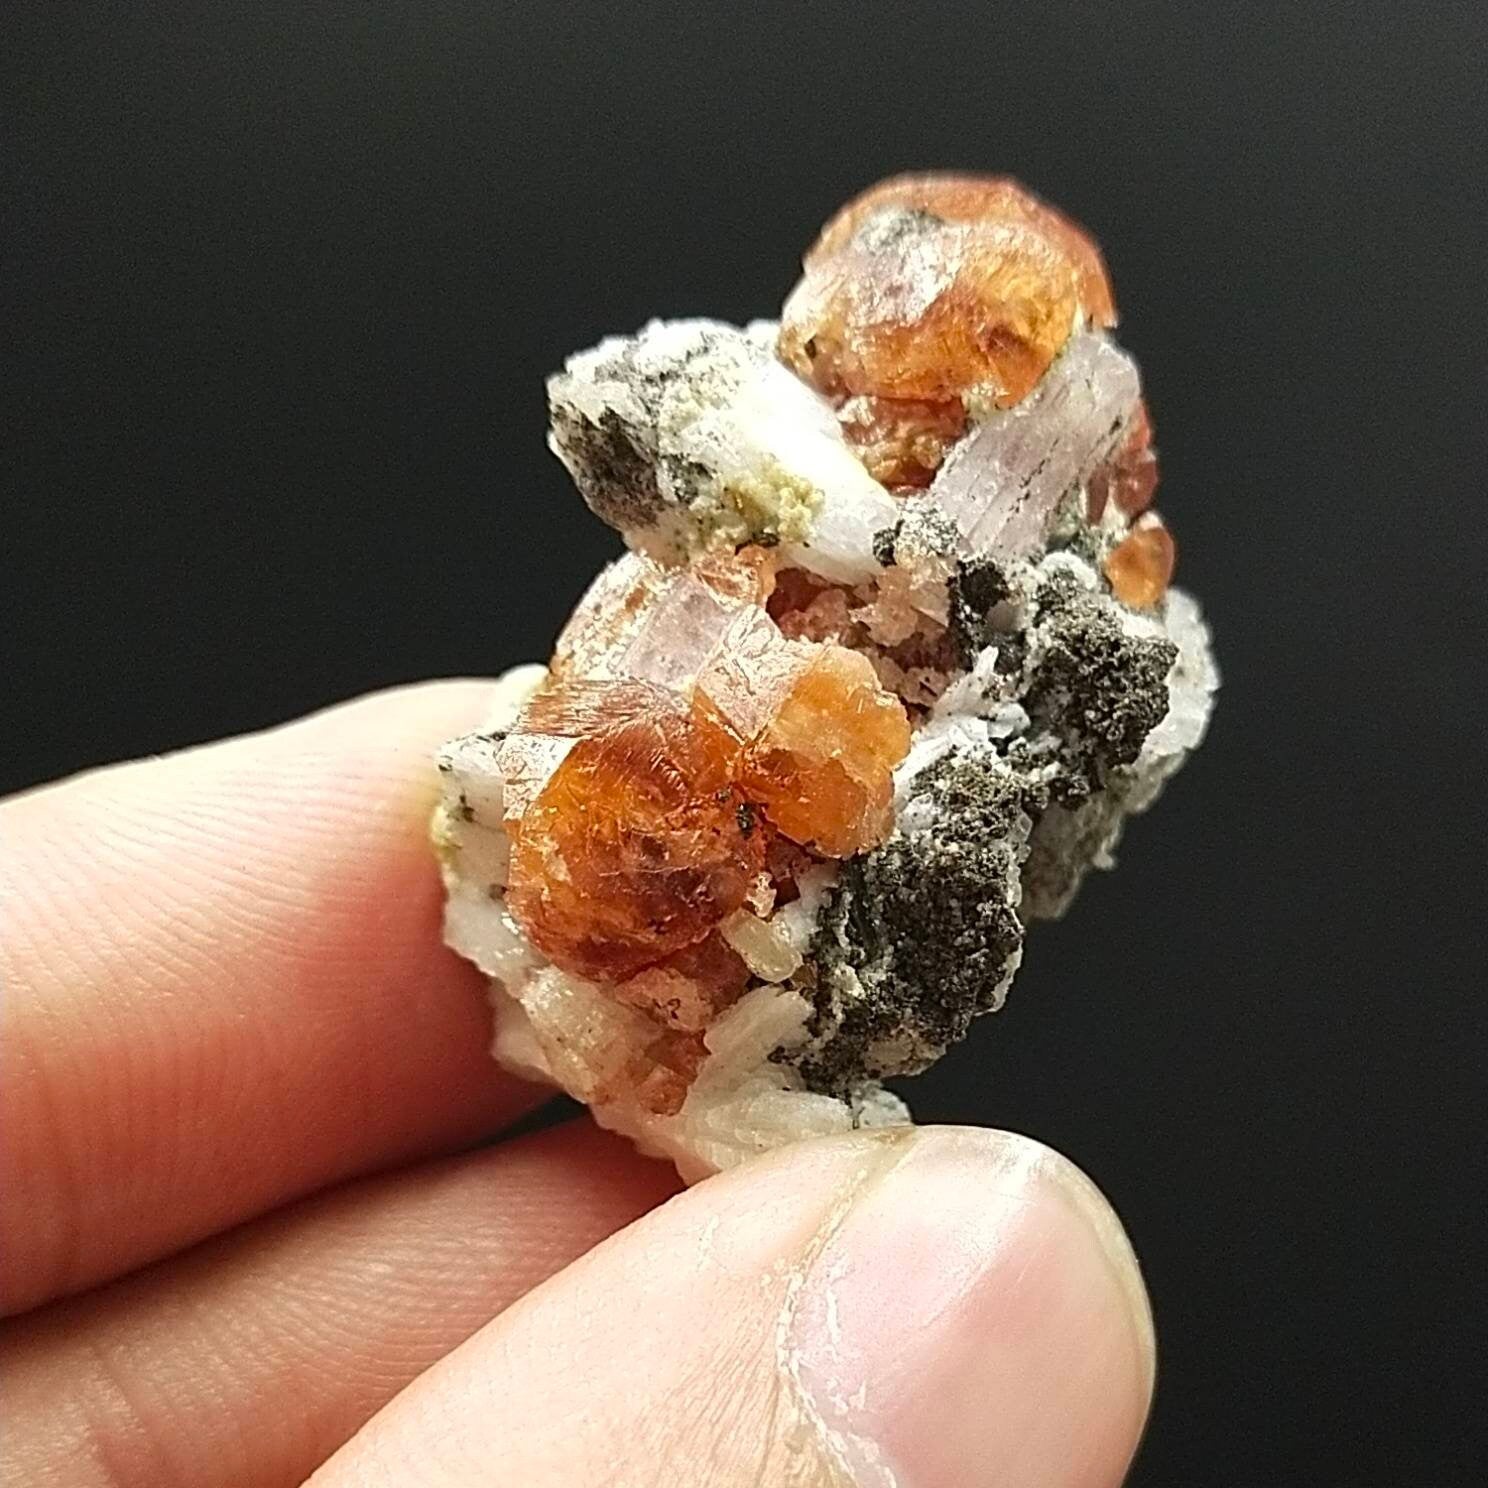 ARSAA GEMS AND MINERALSAn aesthetic Specimen of spessartine garnet on matrix with uv reactive apatite crystal from Pakistan, 13.6 grams - Premium  from ARSAA GEMS AND MINERALS - Just $100.00! Shop now at ARSAA GEMS AND MINERALS